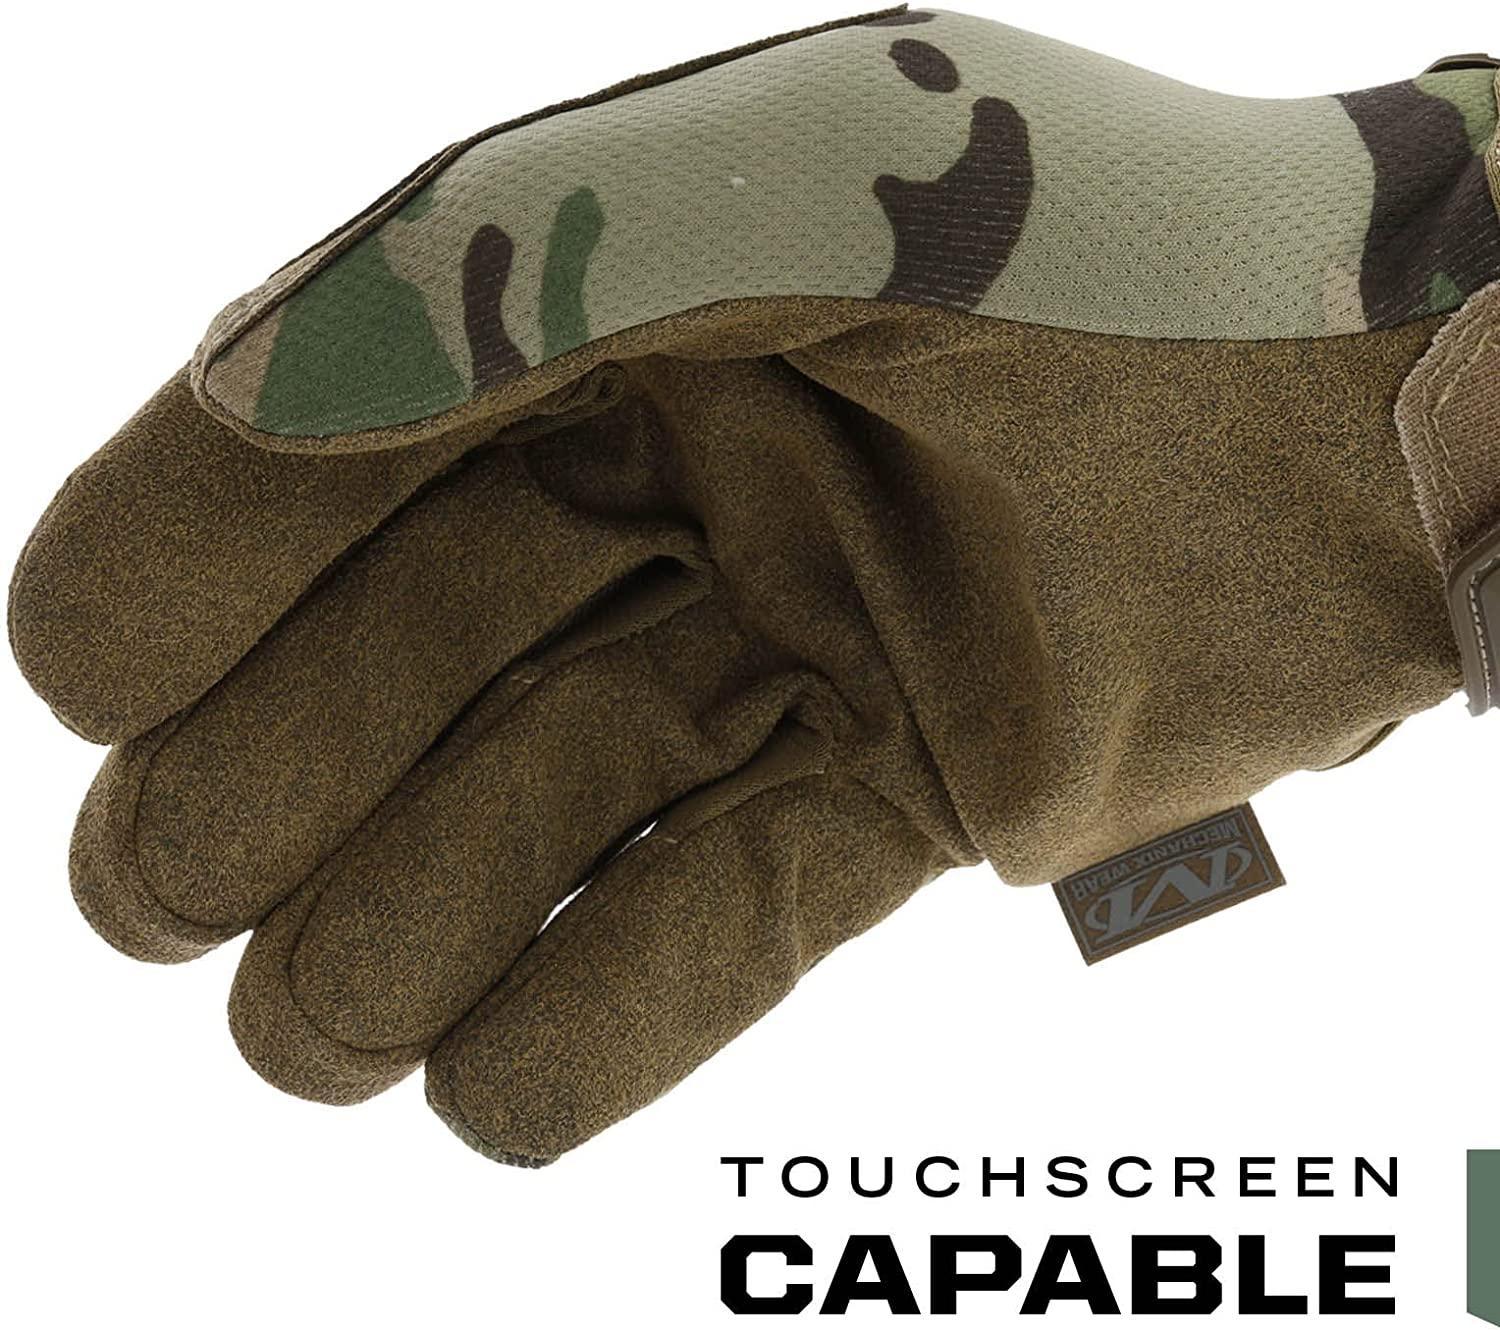 Mechanix Wear: The Original Tactical Work Gloves with Secure Fit